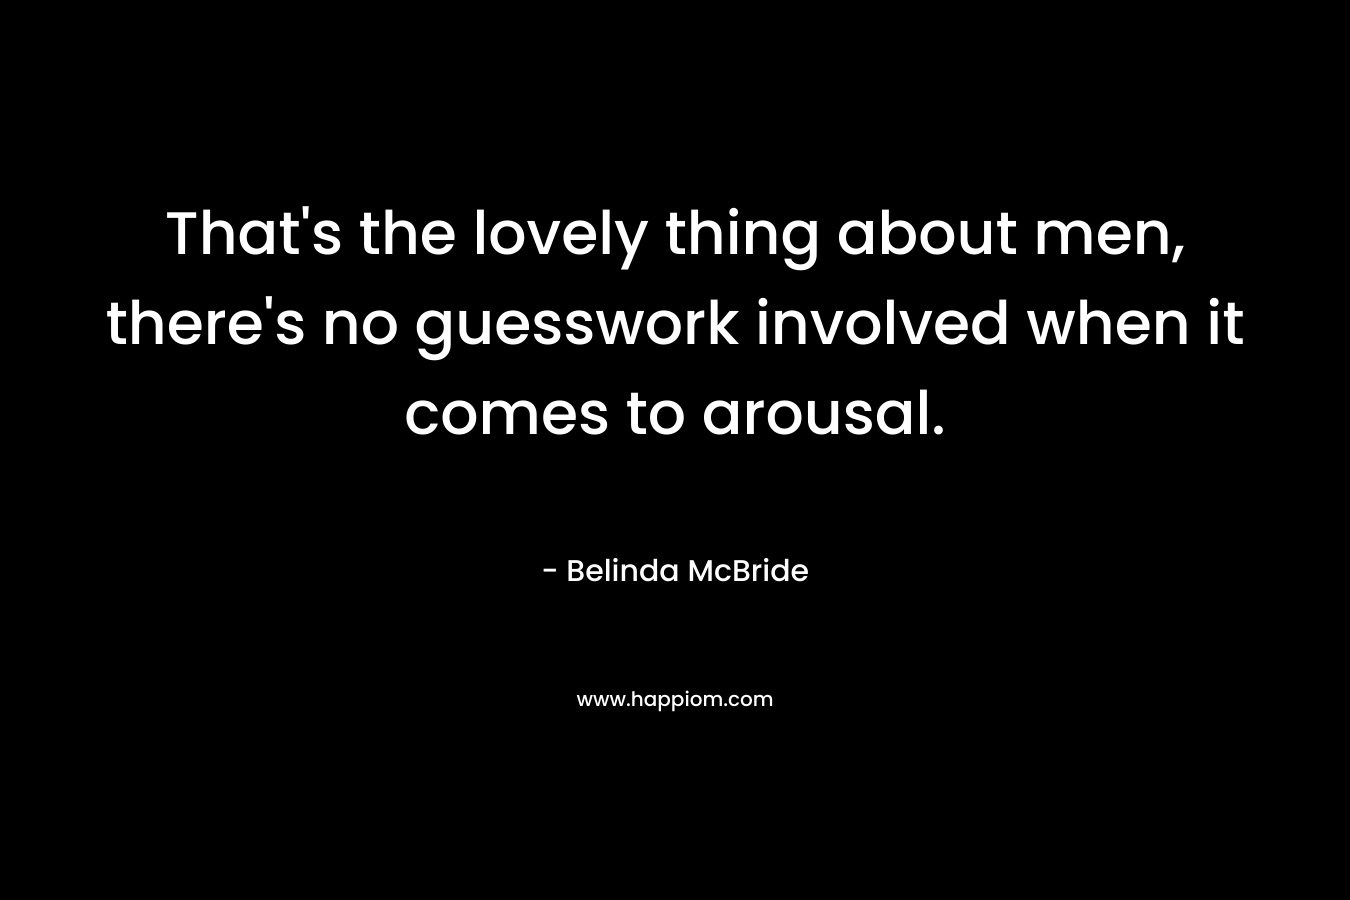 That’s the lovely thing about men, there’s no guesswork involved when it comes to arousal. – Belinda McBride